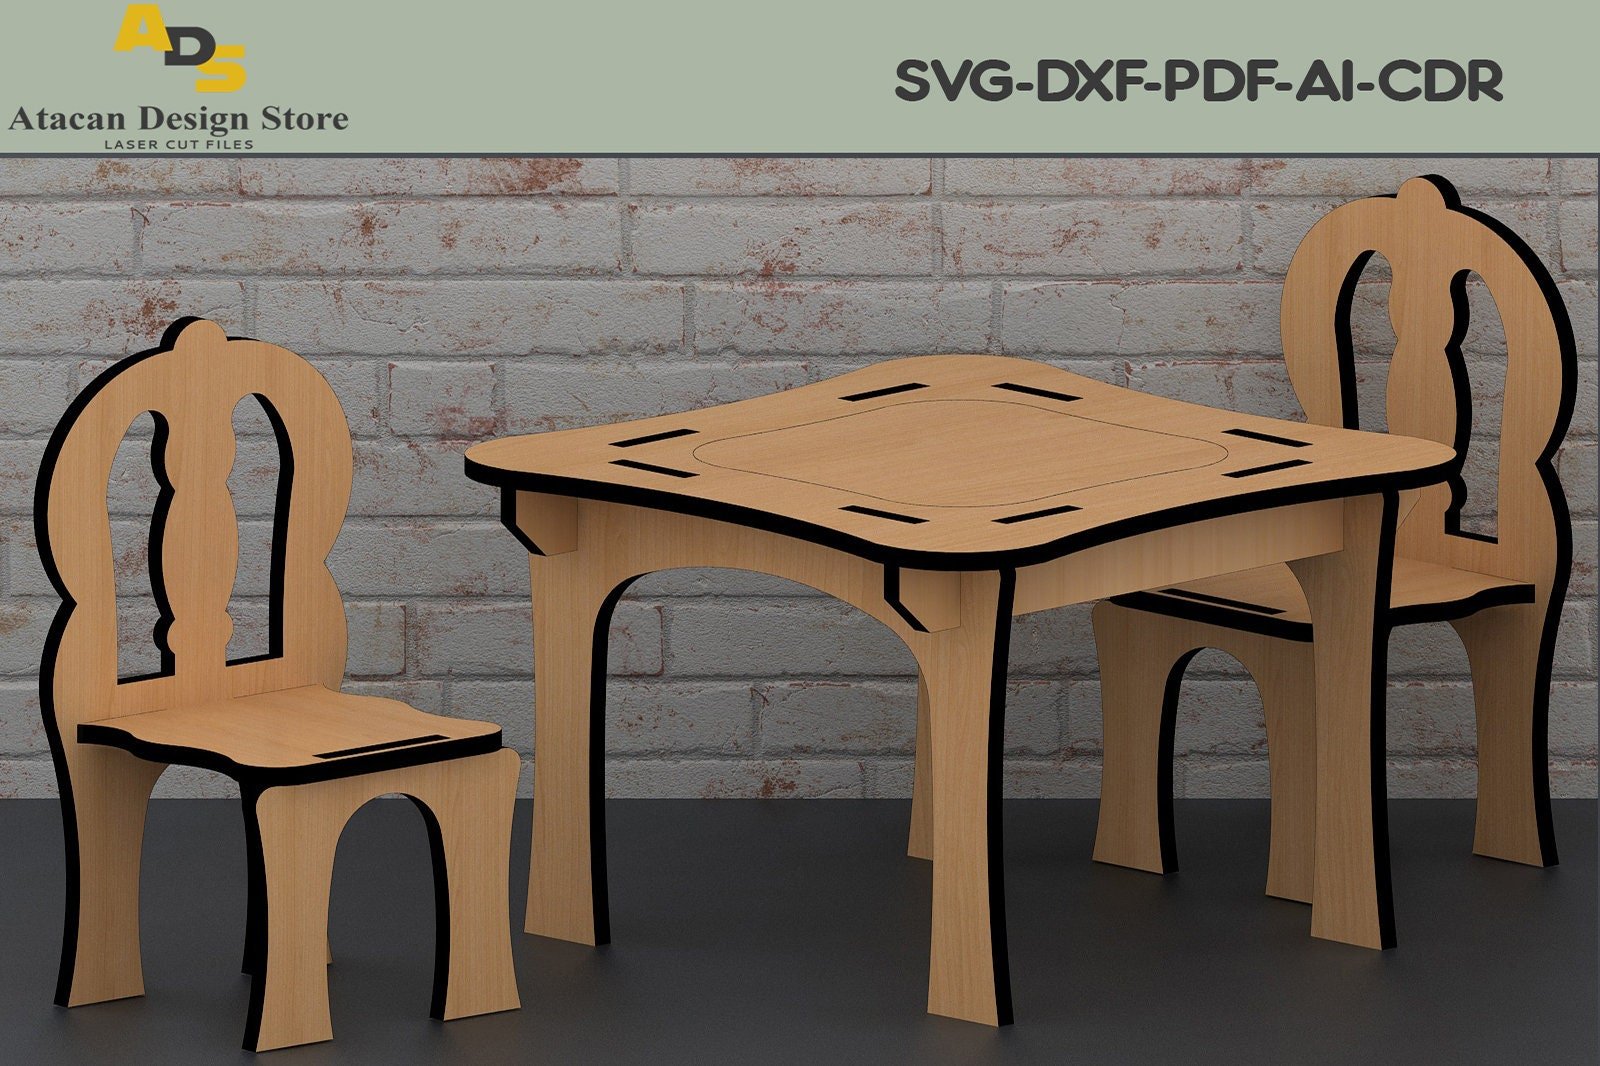 Wooden Table & Chair Laser cut cnc router files and templates Dxf, Svg, Pdf, Ai, Cdr formats ADS127